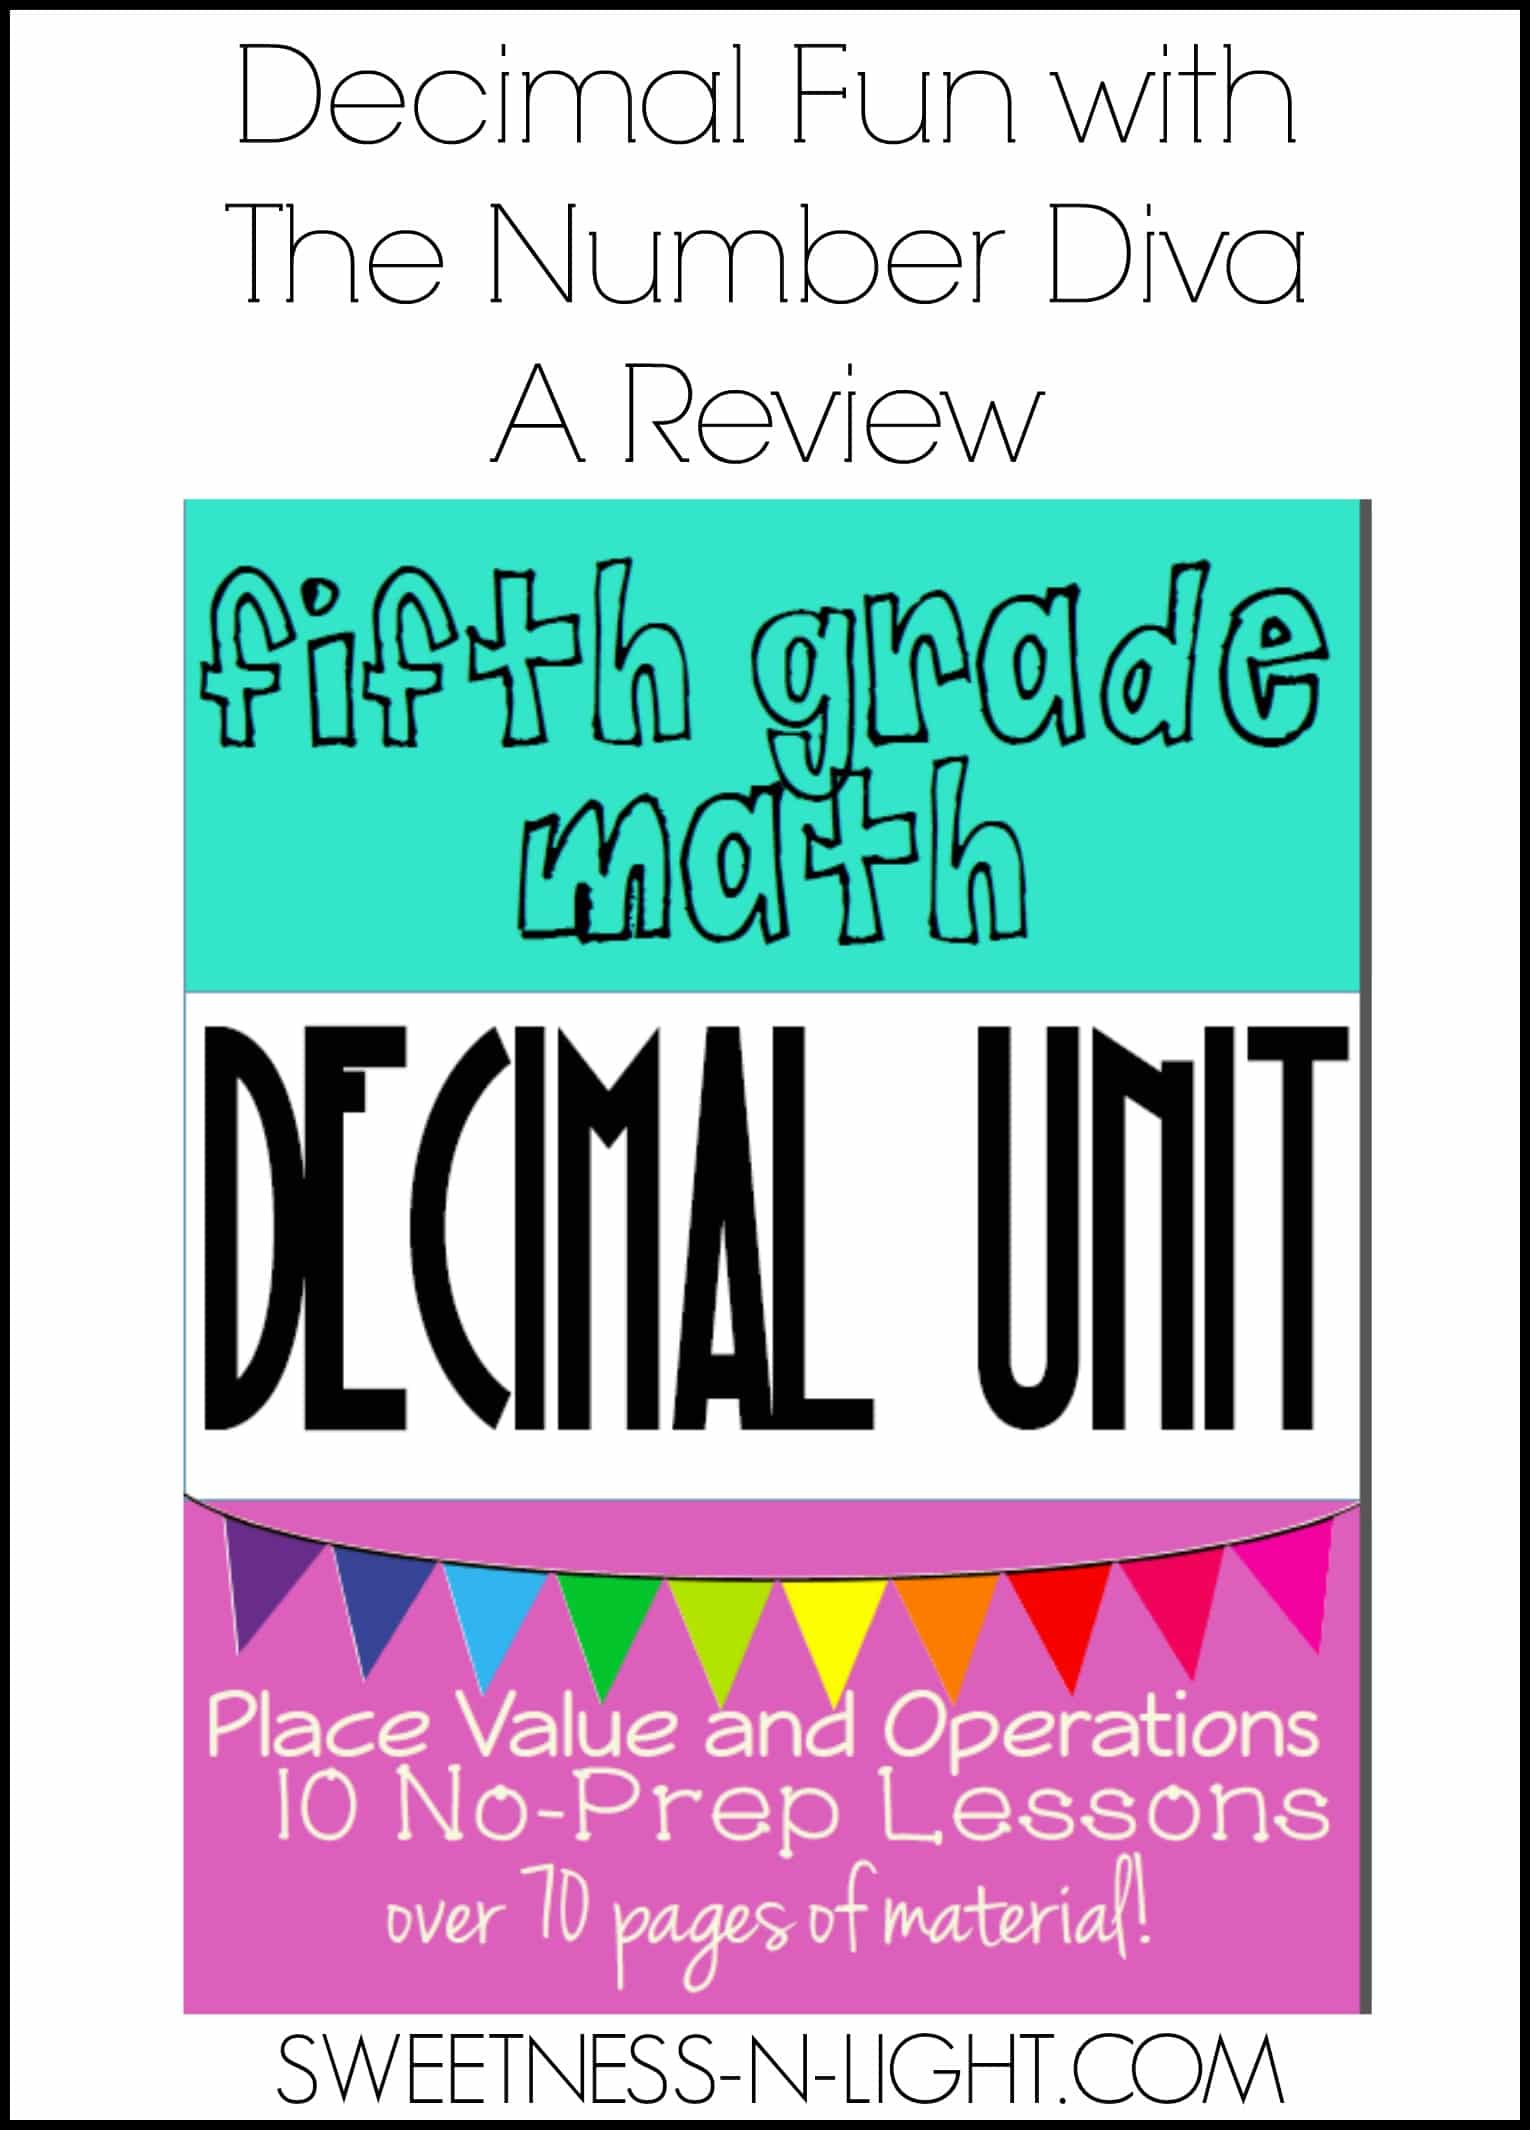 Decimal Fun With The Number Diva – A Review